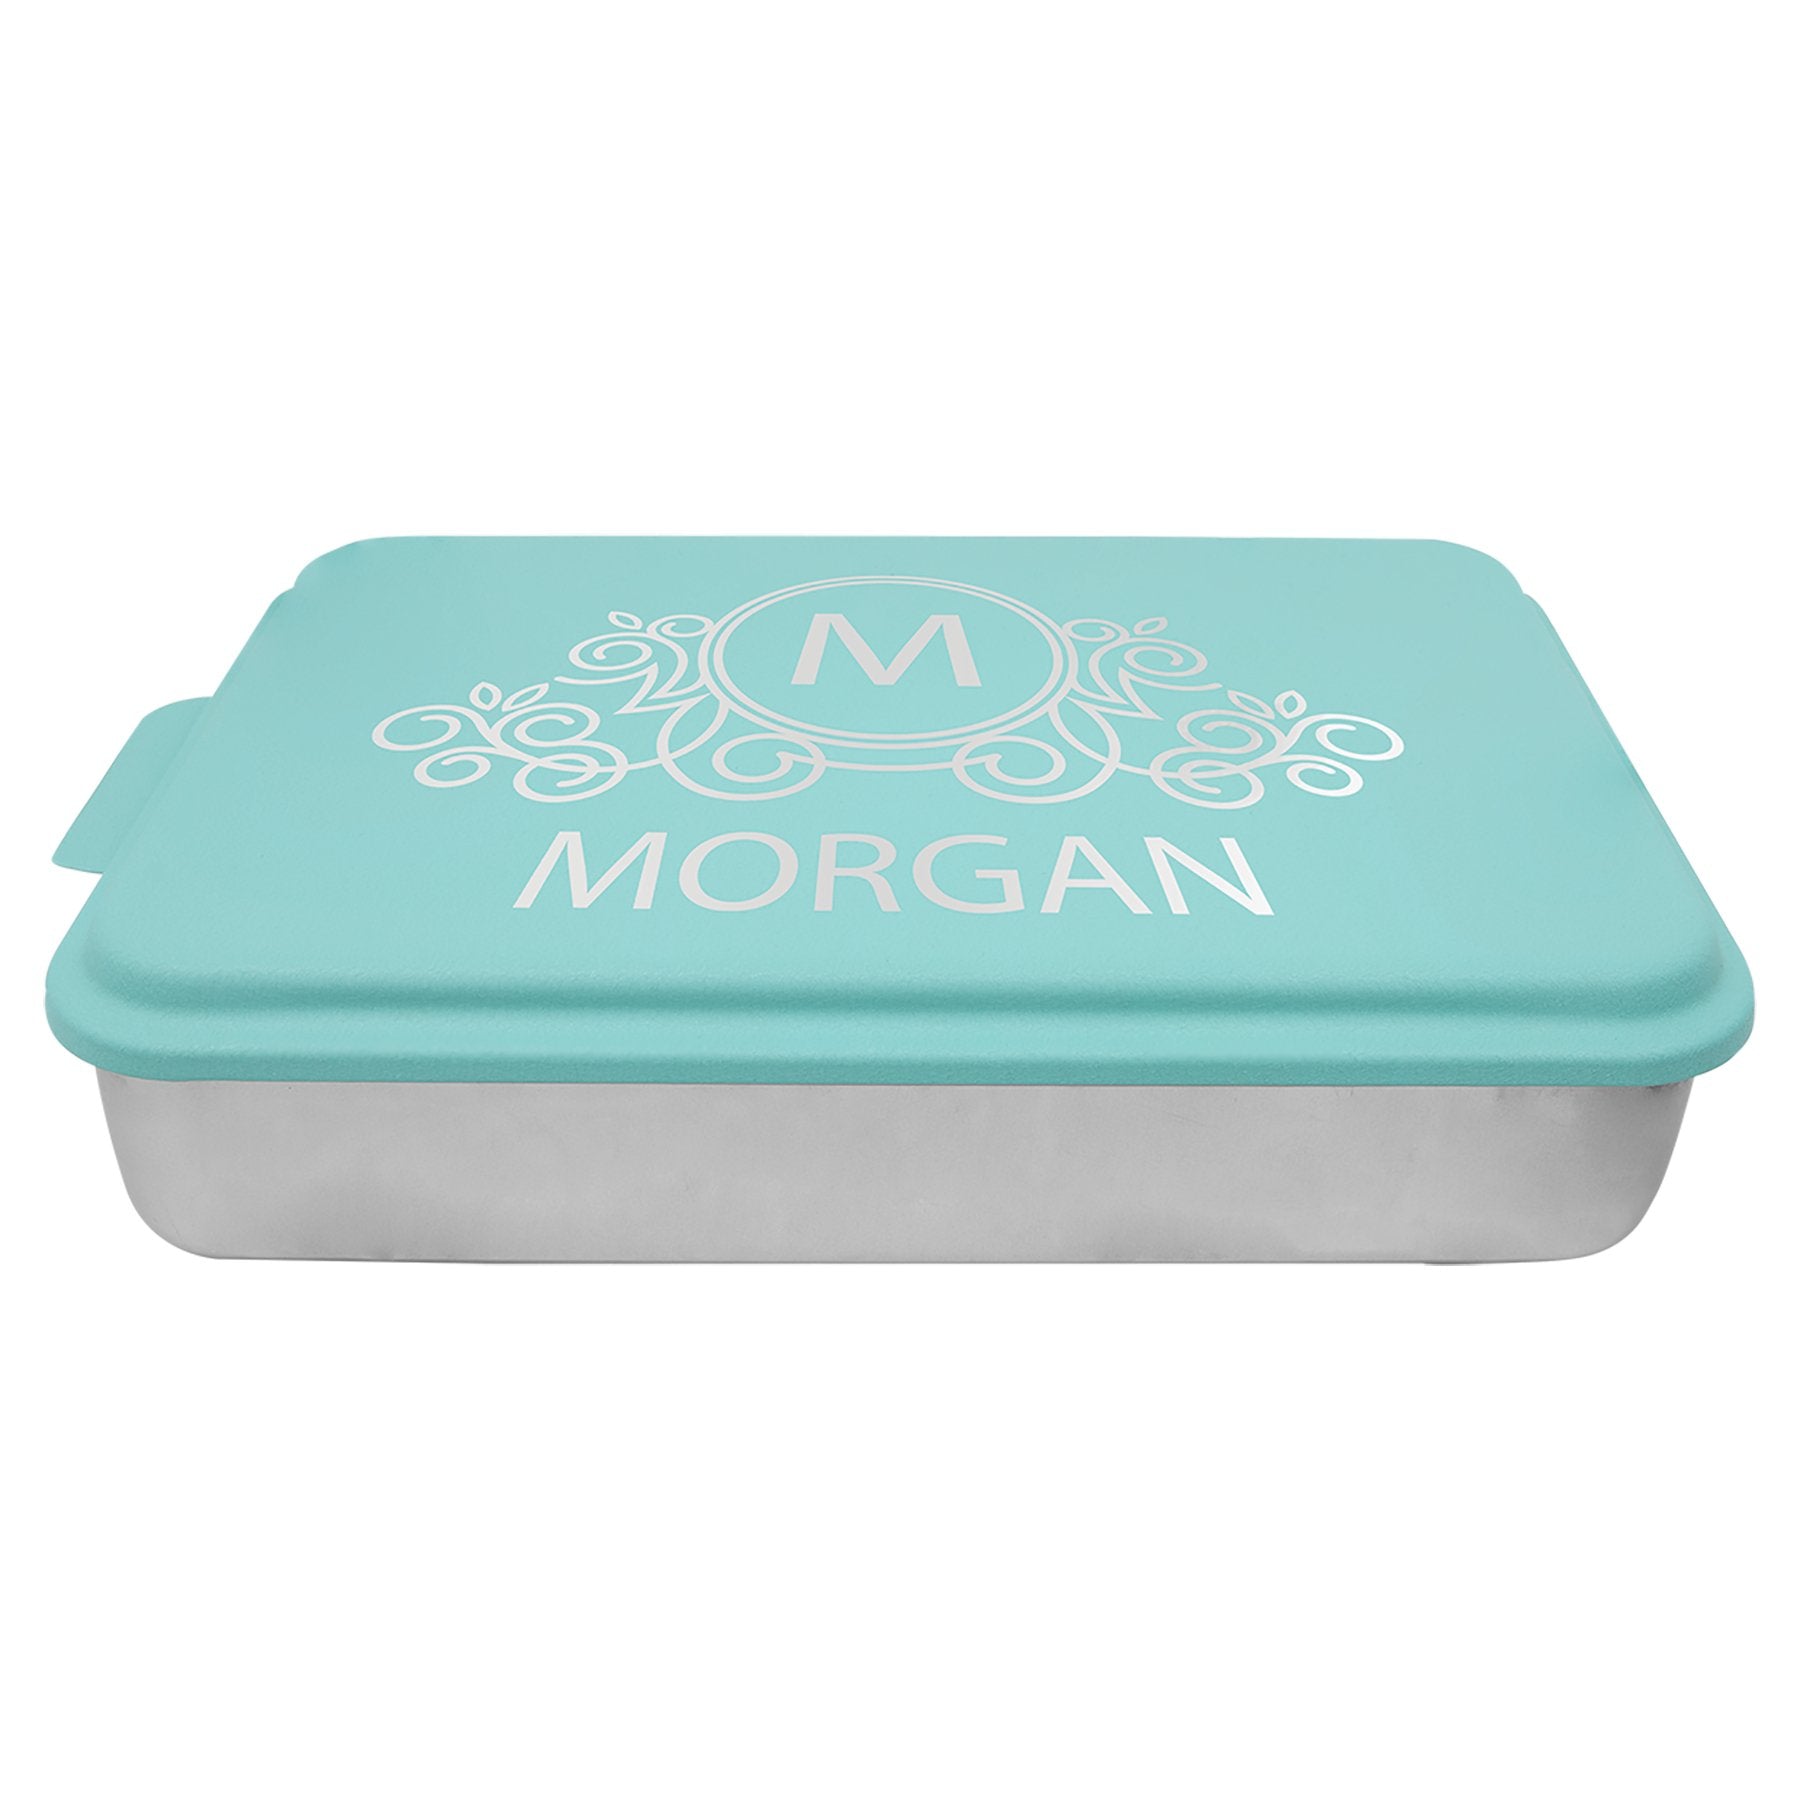 Reviews: 9X13 Original Cake Pan & Lid, Turquoise Smooth Semigloss Finish -  $31.99 : That's My Pan!, Personalized Cake Pans and More